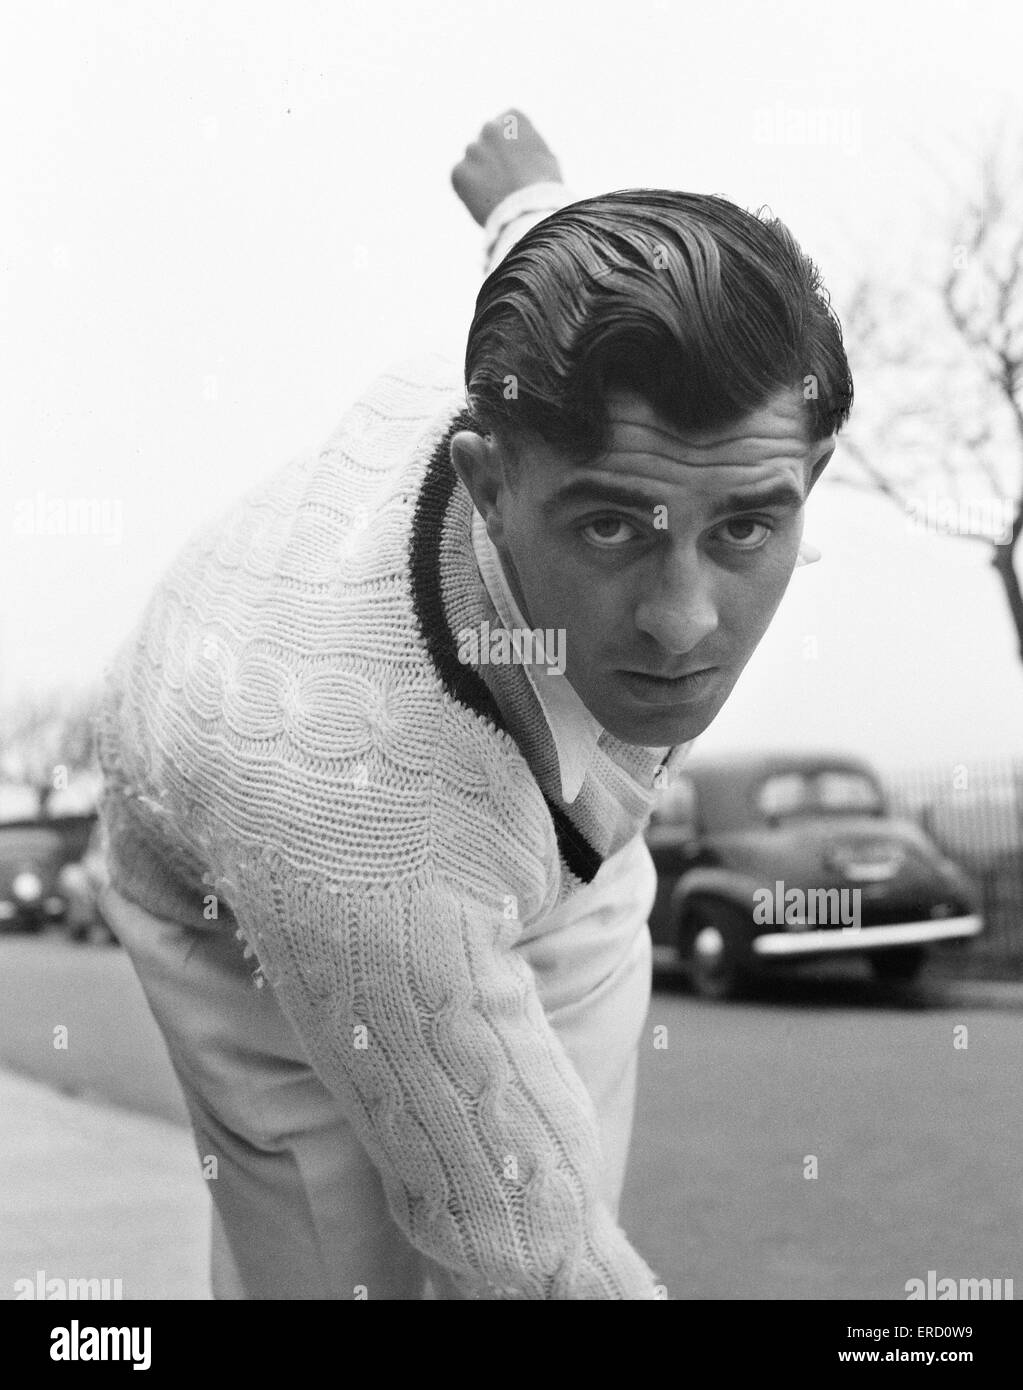 Yorkshire and England fast bowler Freddie Trueman ahead of the upcoming Ashes test series against Australia. 18th April 1953. Stock Photo